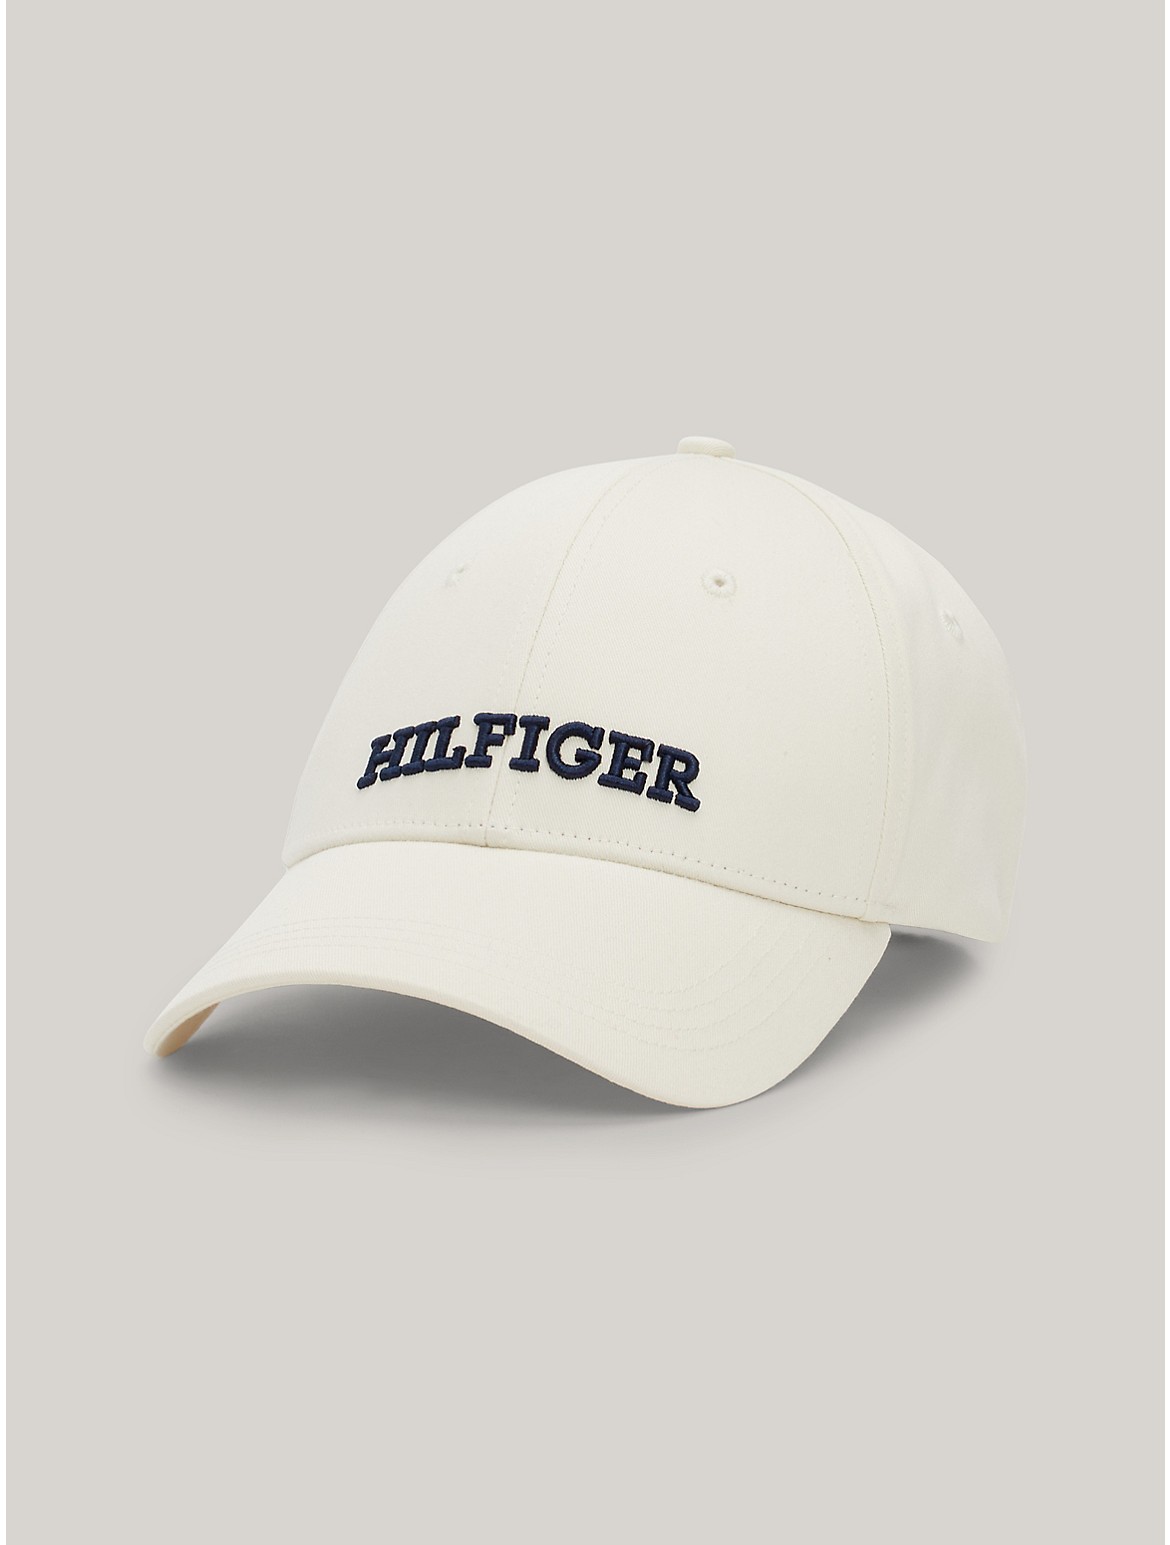 Tommy Hilfiger Women's Embroidered Monotype Cap